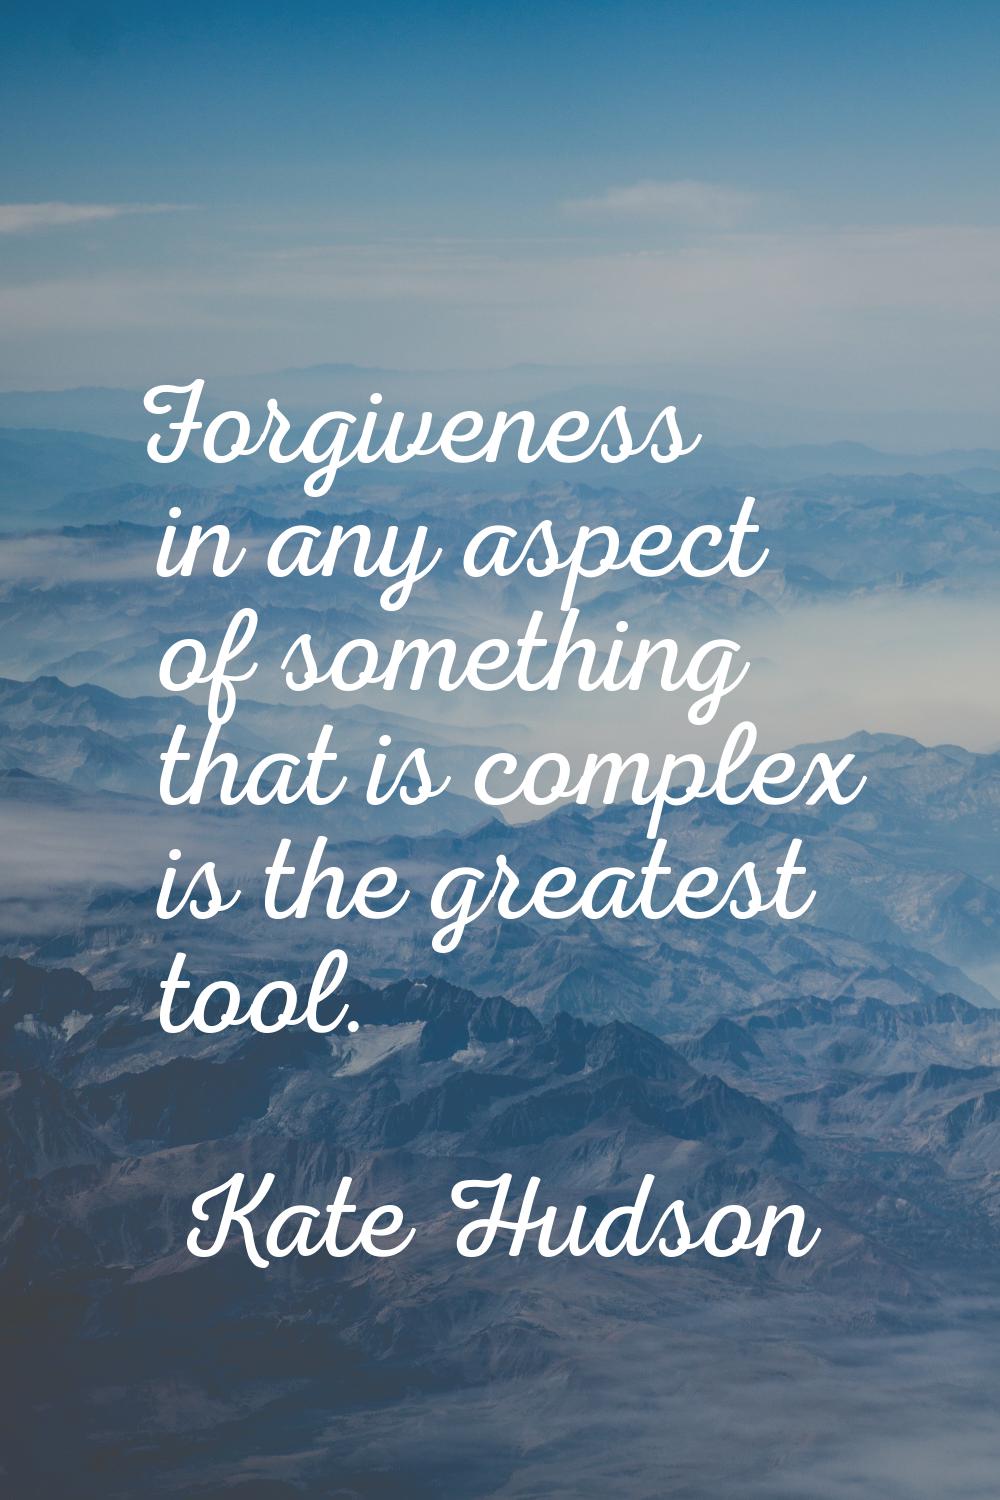 Forgiveness in any aspect of something that is complex is the greatest tool.